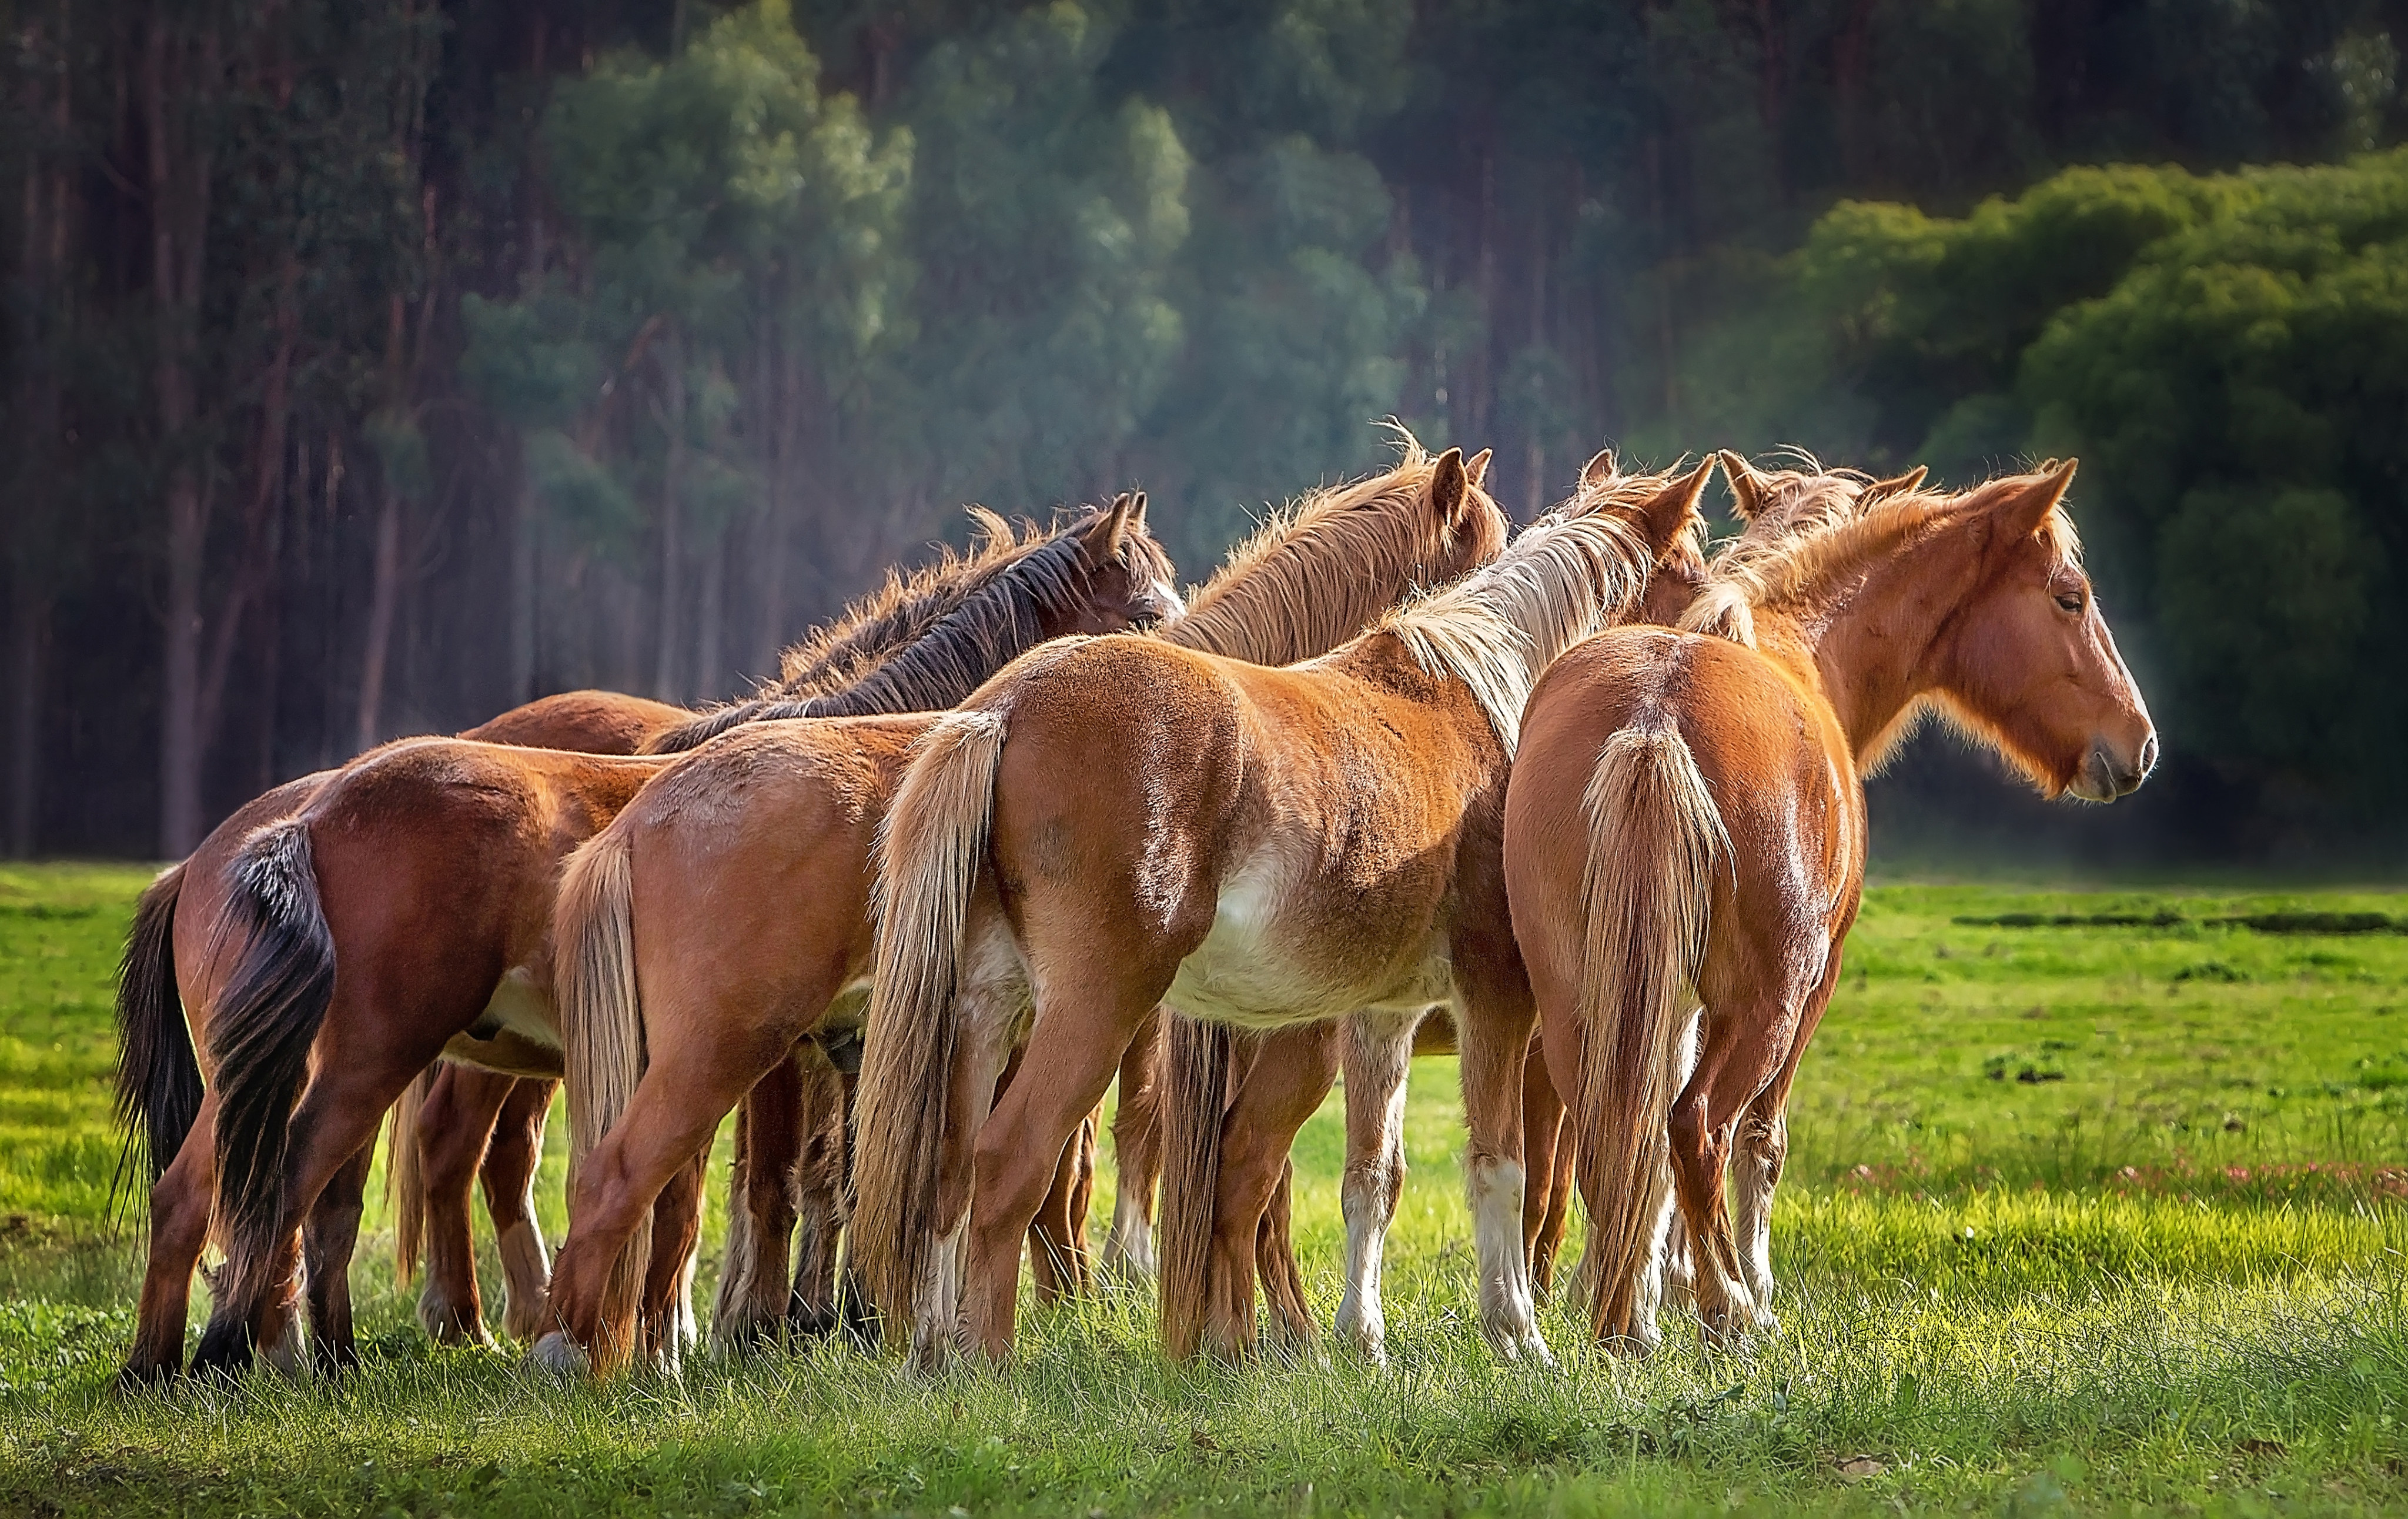 Australia approved the aerial shooting of wild horses to protect native wildlife, in a national park. Photo: Shutterstock